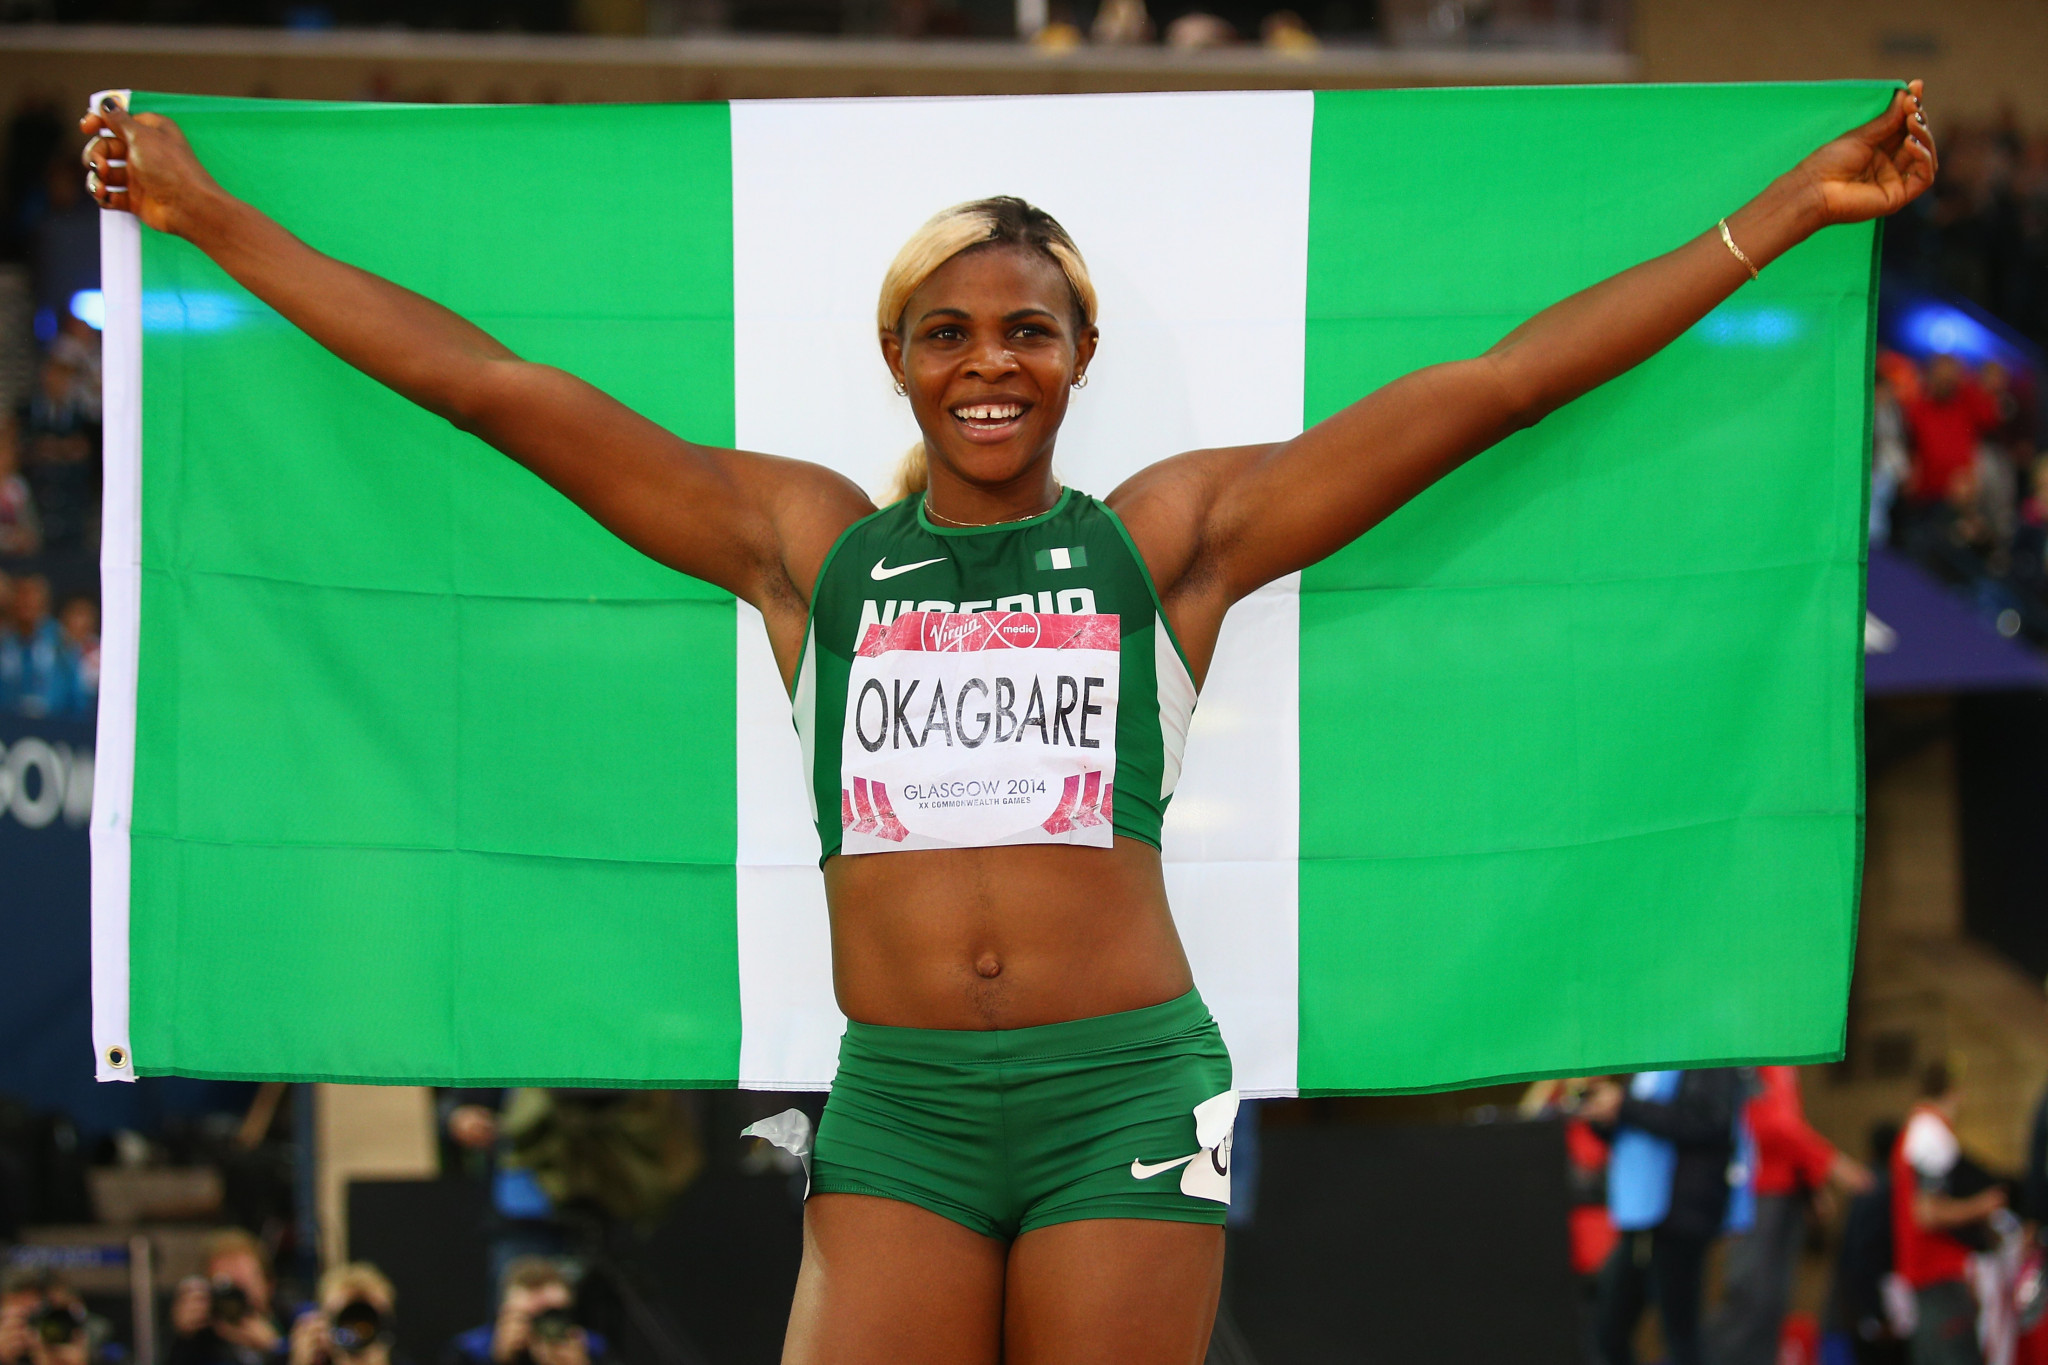 Nigerian sprinter Okagbare charged with three anti-doping offences by AIU